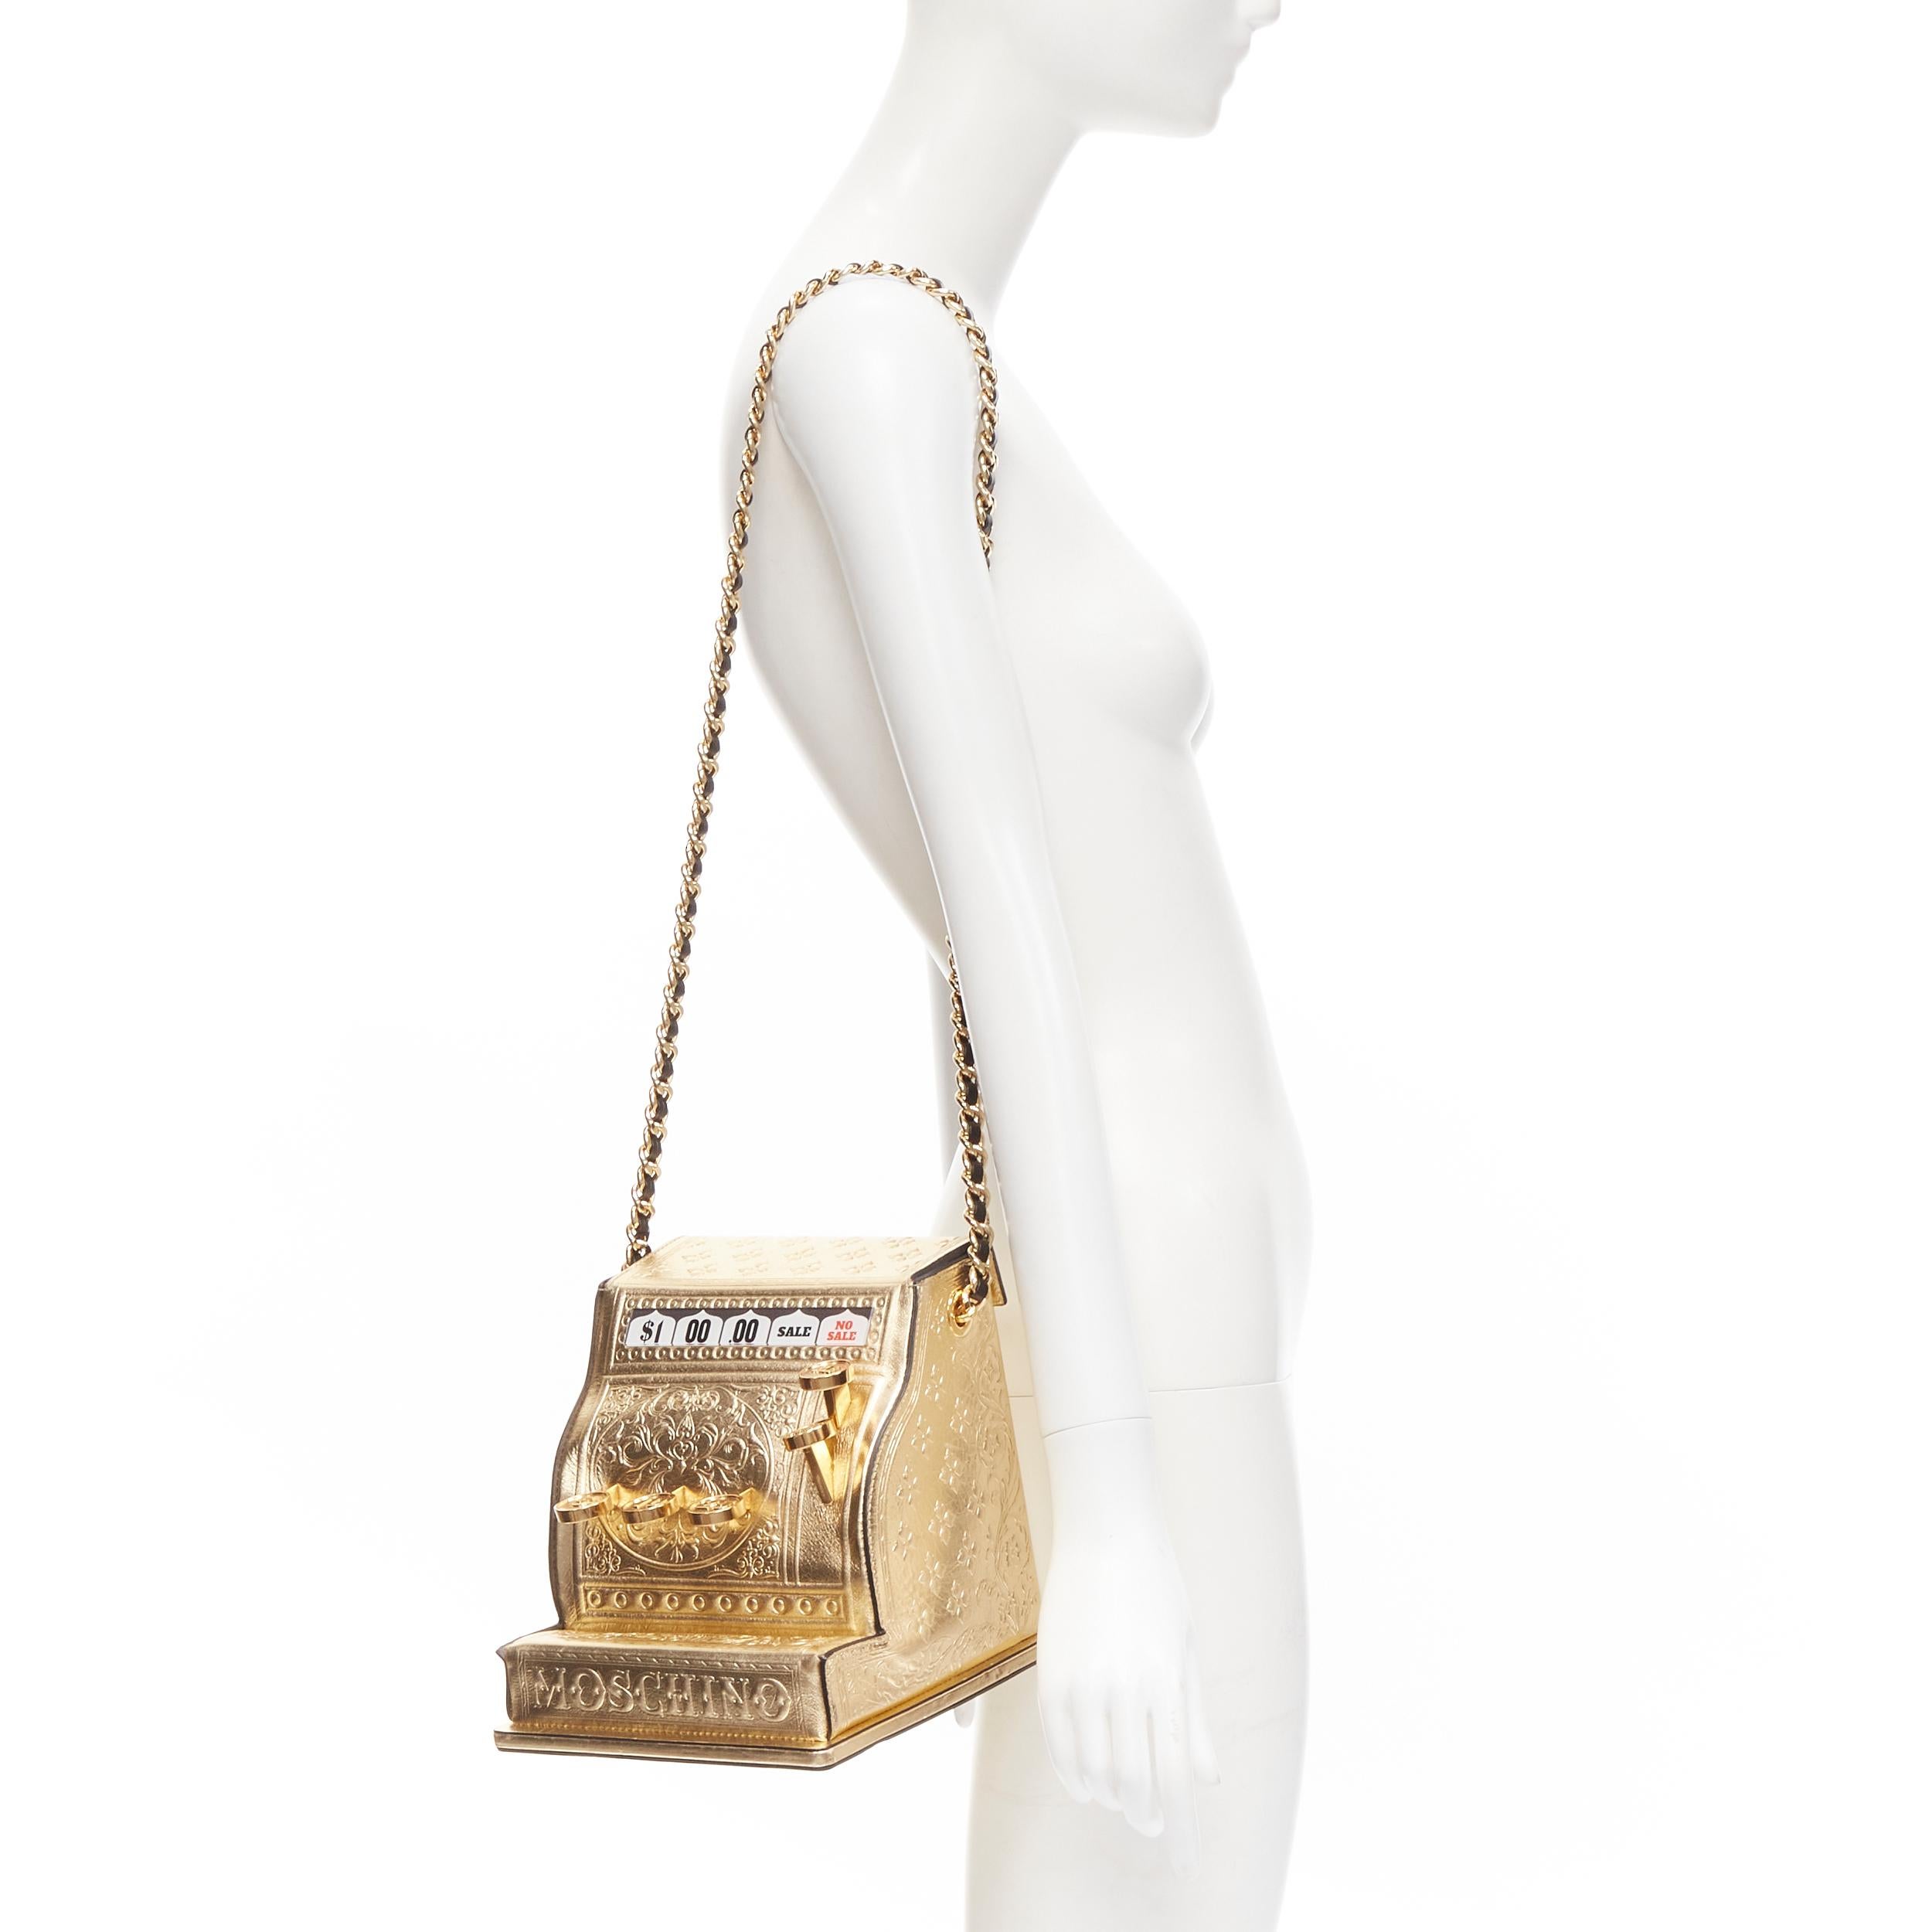 rare MOSCHINO Couture! 2019 Runway gold Cash Register Machine crossbody bag 
Reference: TGAS/B02126 
Brand: Moschino 
Designer: Jeremy Scott 
Collection: Fall Winter 2019 
Runway Material: Leather 
Color: Gold 
Pattern: Solid 
Closure: Magnetic